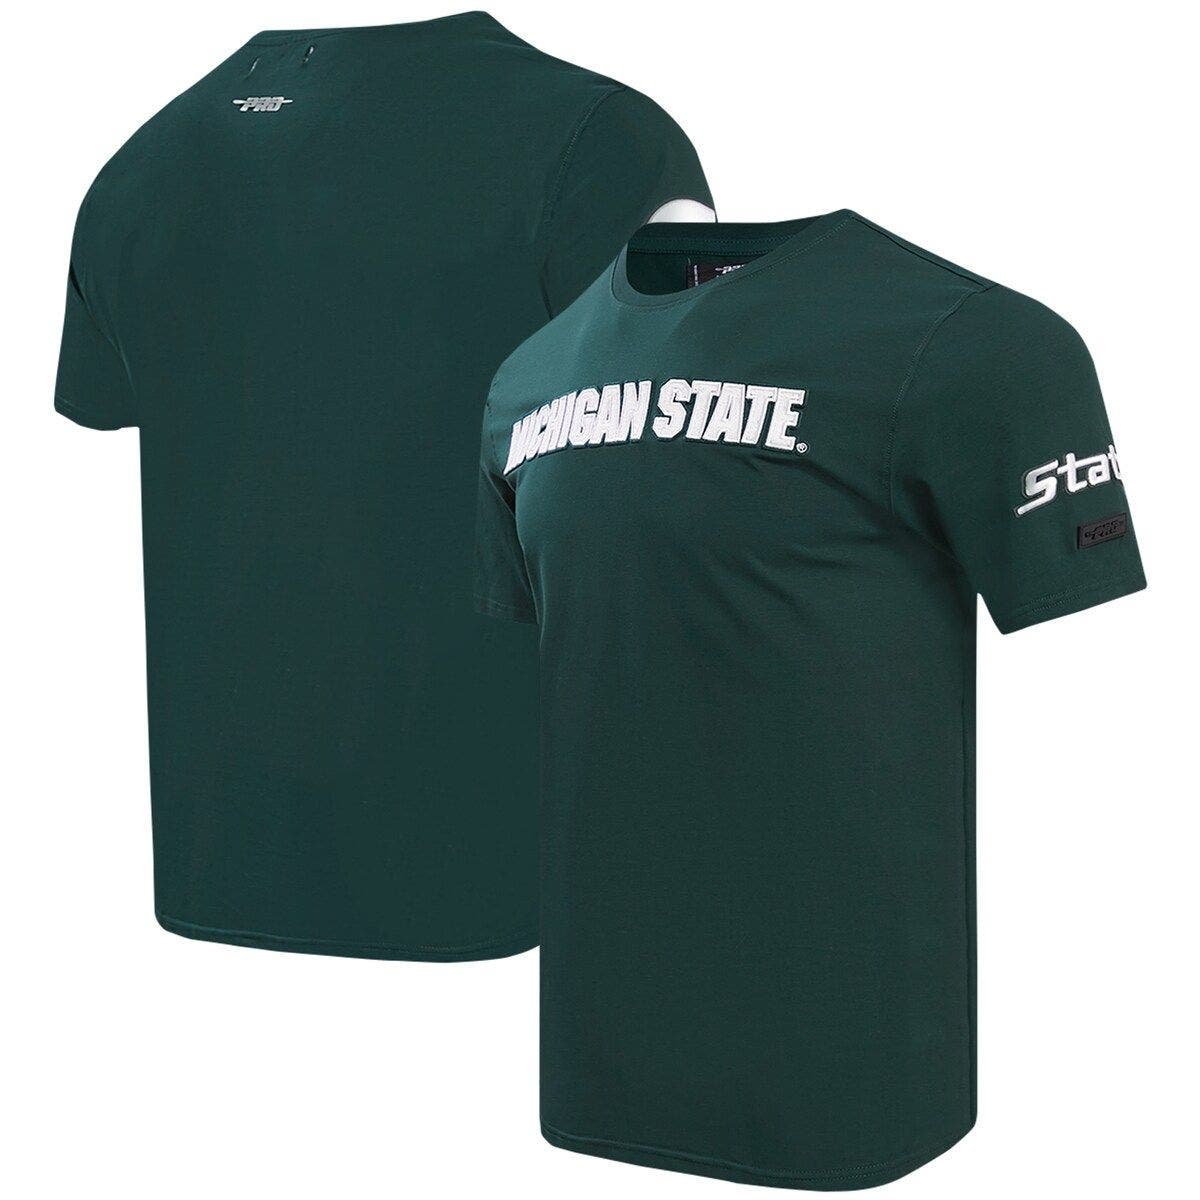 Michigan State Spartans lacrosse legends jersey